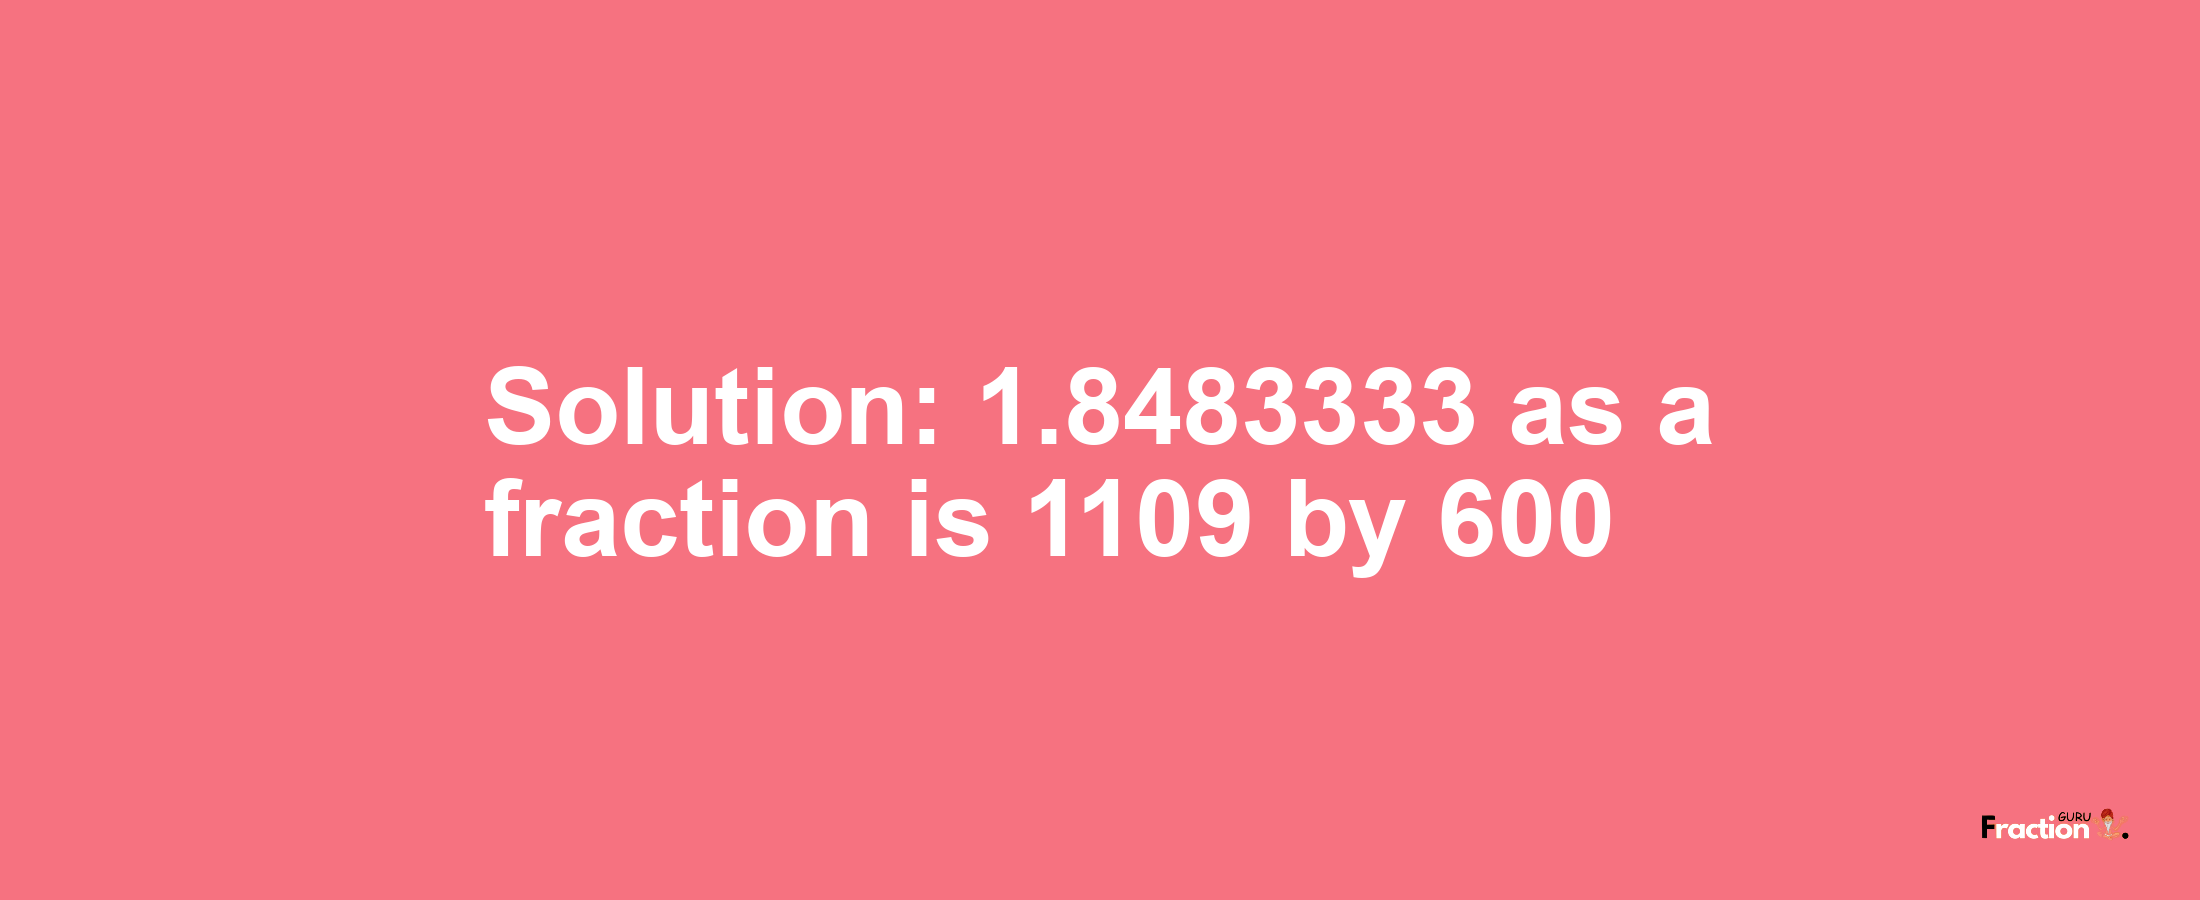 Solution:1.8483333 as a fraction is 1109/600